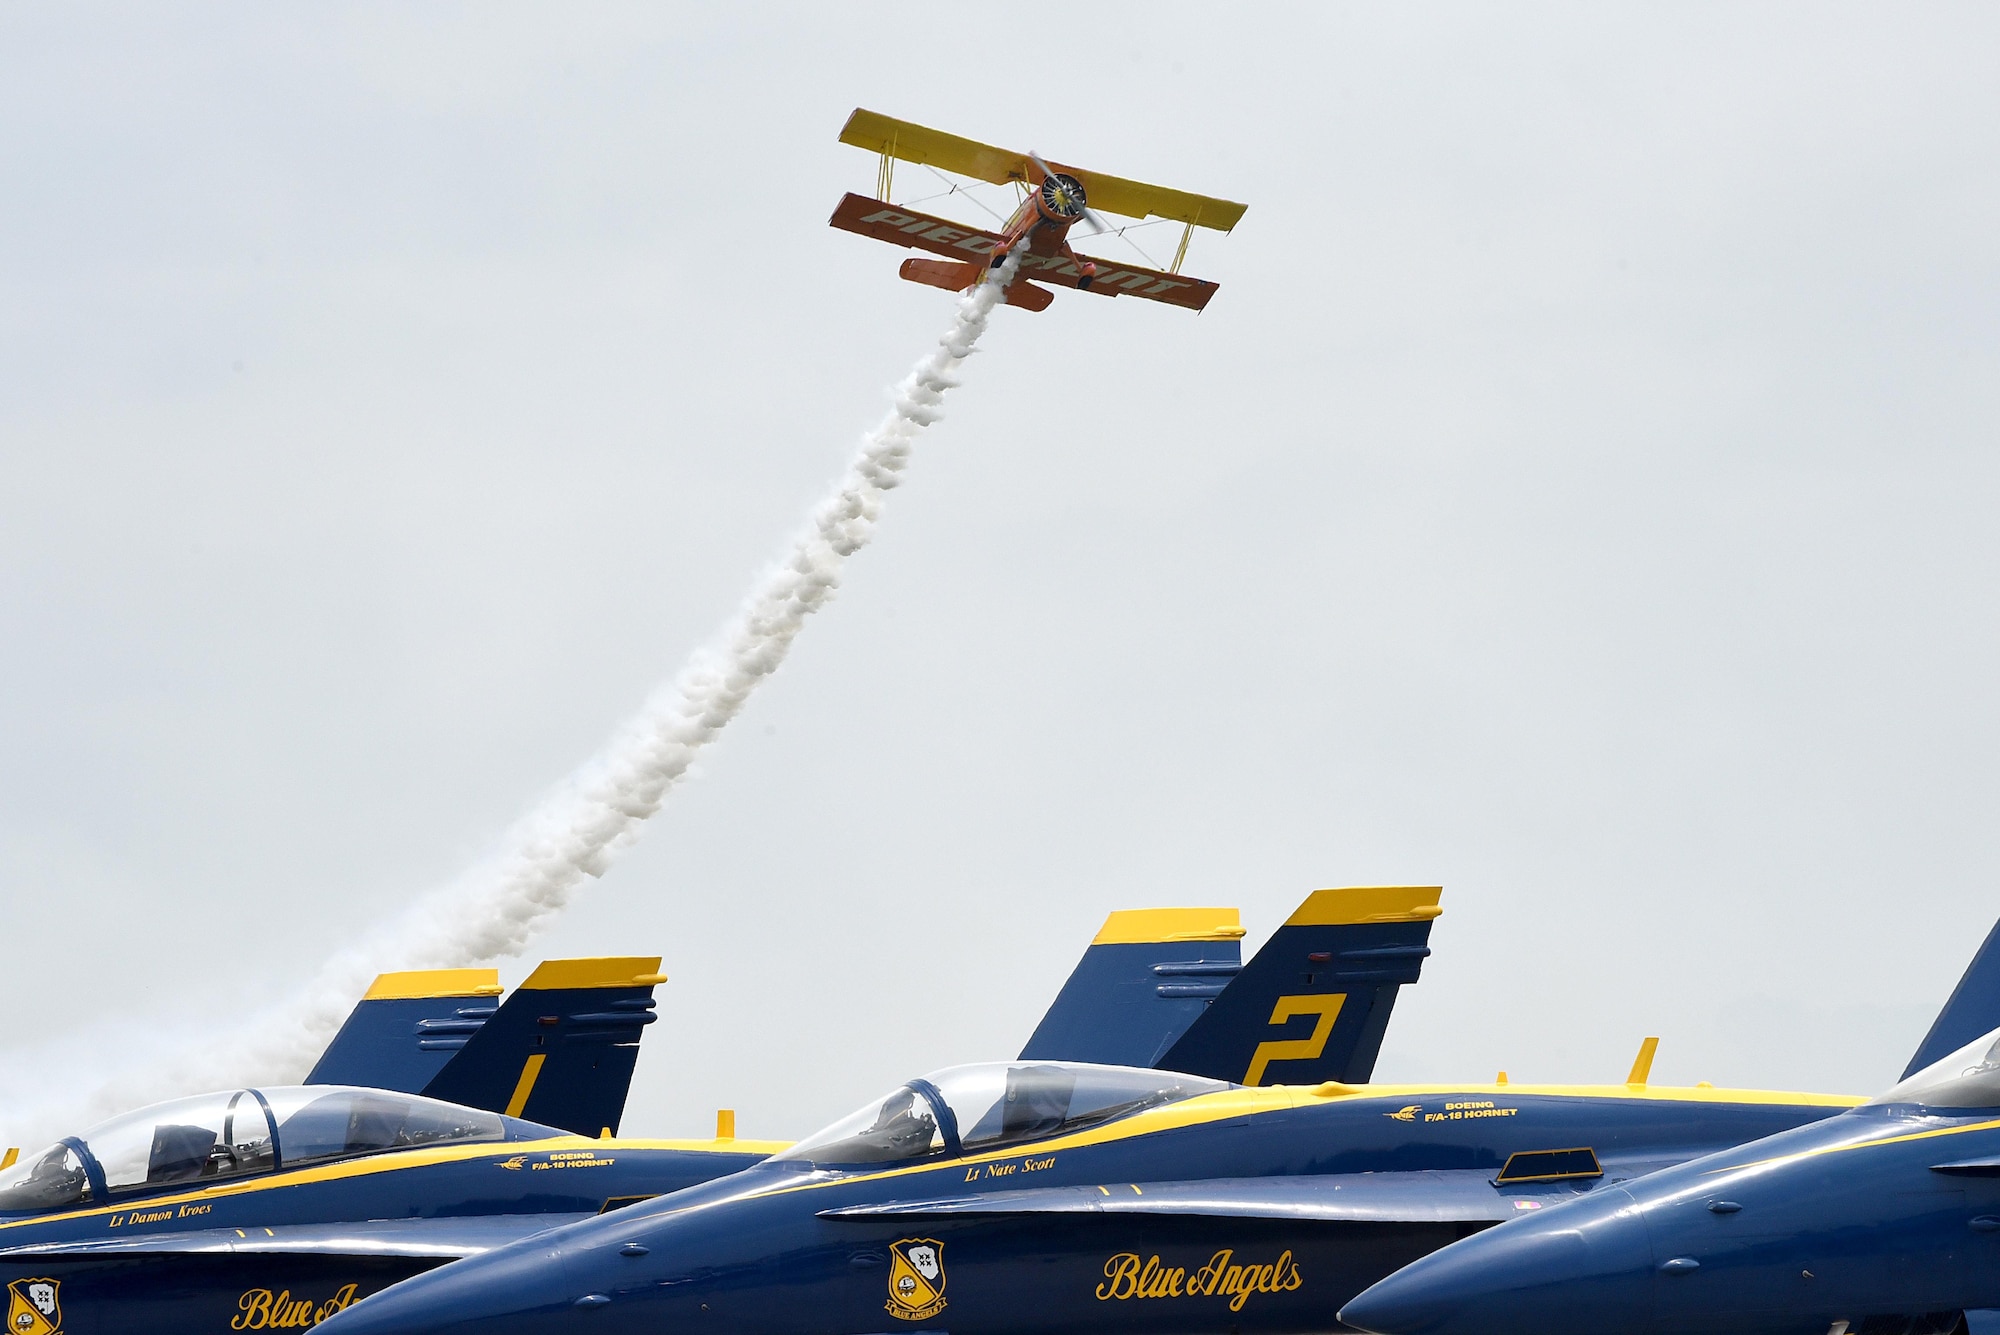 Gene Soucy pilots a Grumman biplane nicknamed “Showcat” over the U.S. Navy Blue Angels aircraft during the Wings Over Wayne Air Show, May 21, 2017, at Seymour Johnson Air Force Base, North Carolina. Soucy began professional airshow flying in 1968. (U.S. Air Force photo by Airman 1st Class Victoria Boyton)